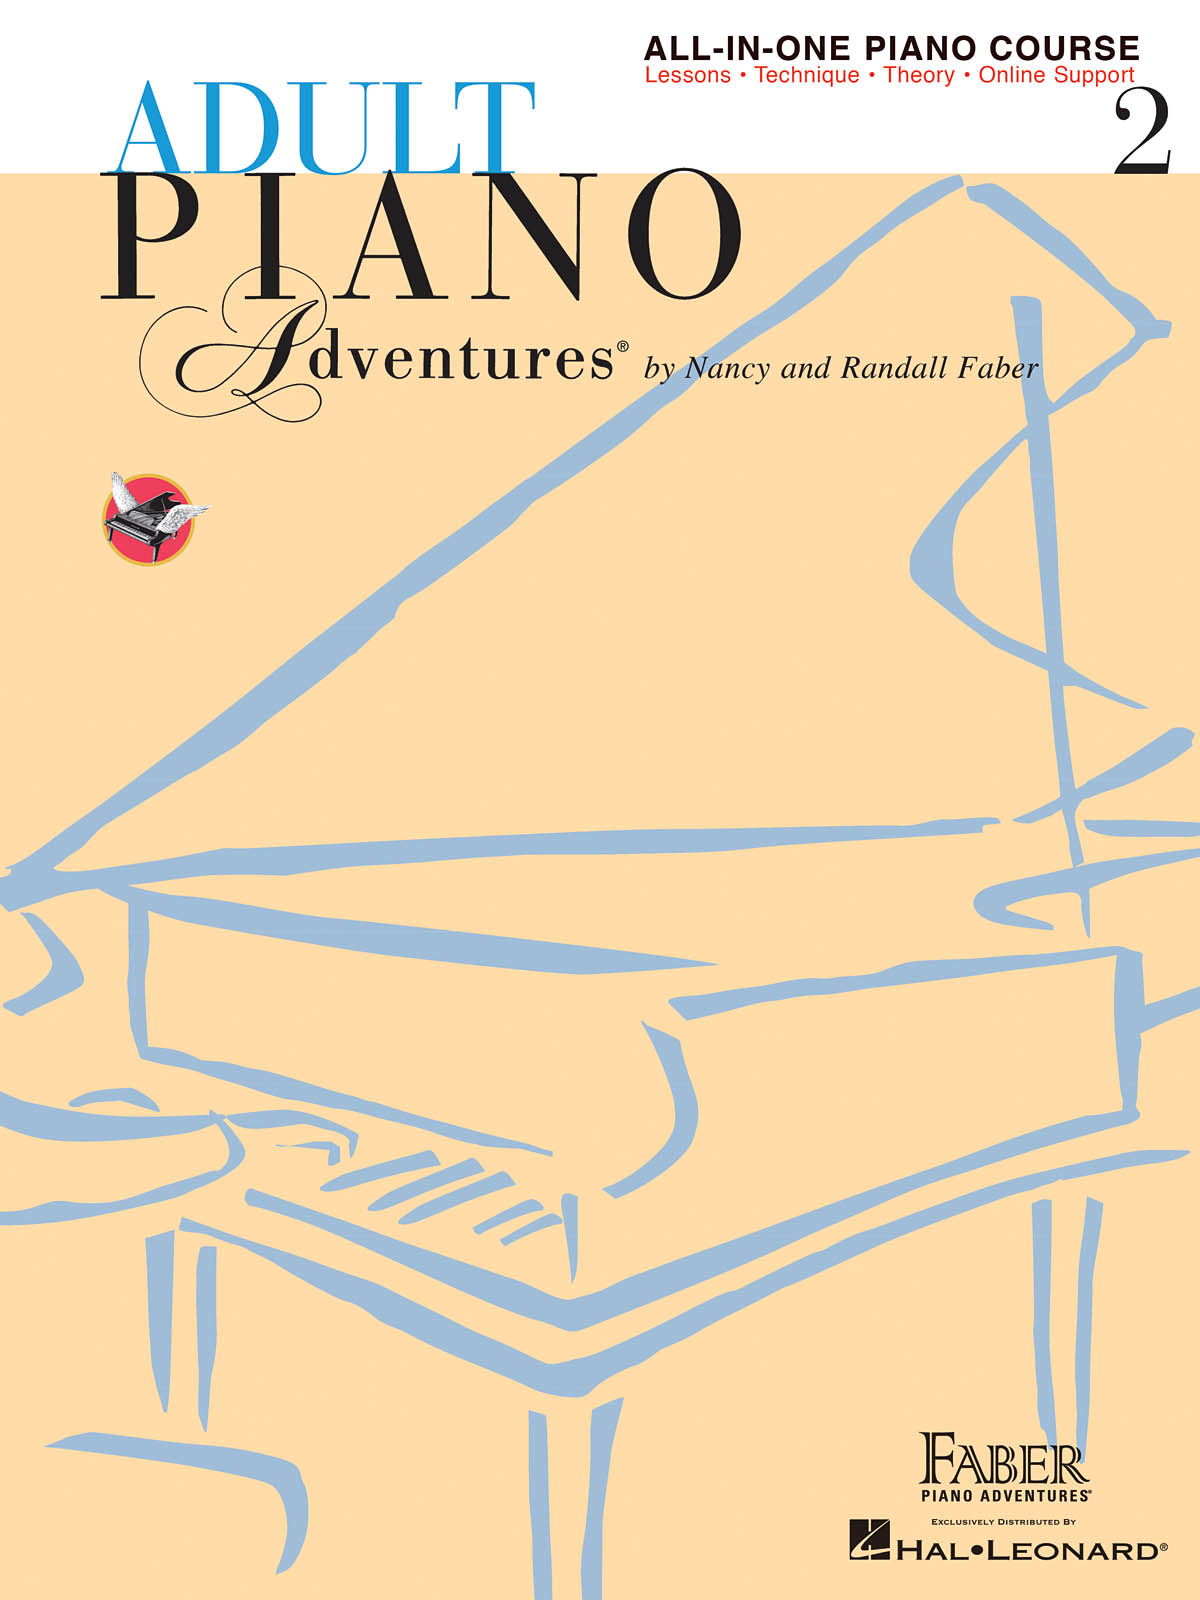 Adult Piano Adventures All-in-One Lesson Book 2 - Spiral Bound